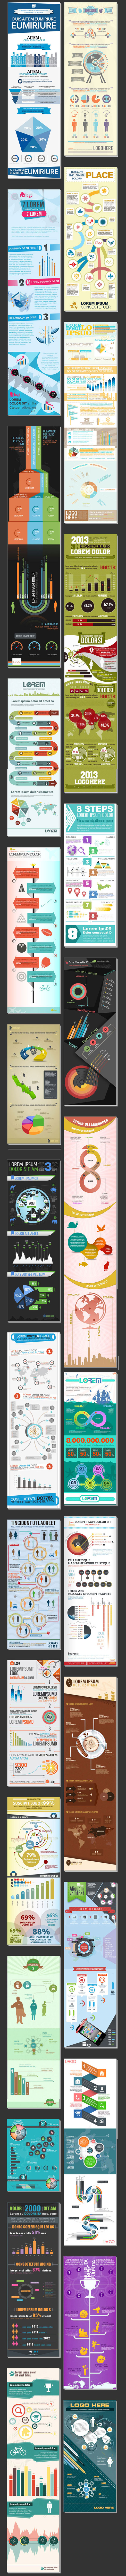 infographics-preview